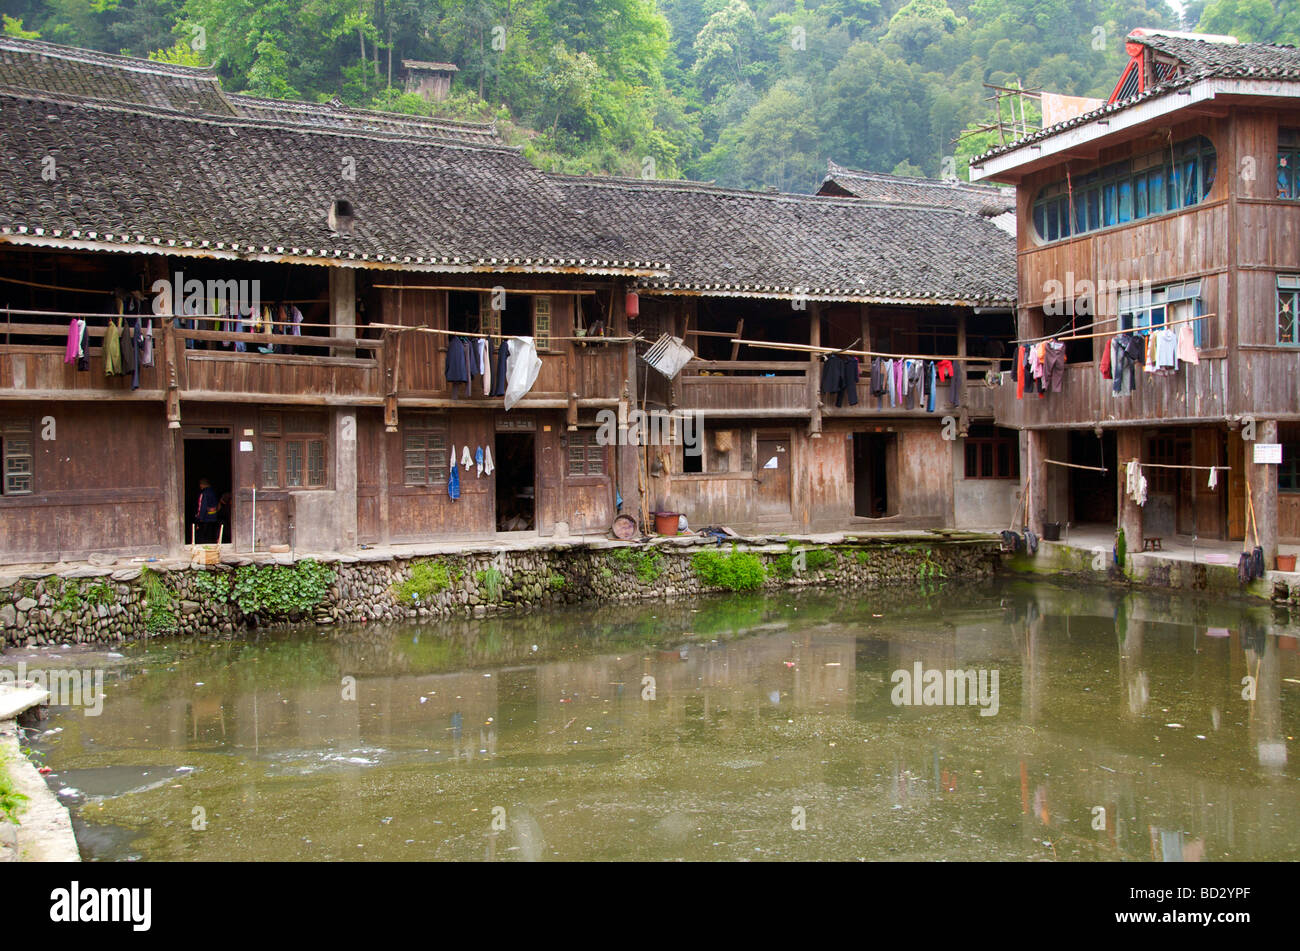 Typical wooden buildings characterize a Dong Village Zhaoxing Guizhou Province China Stock Photo